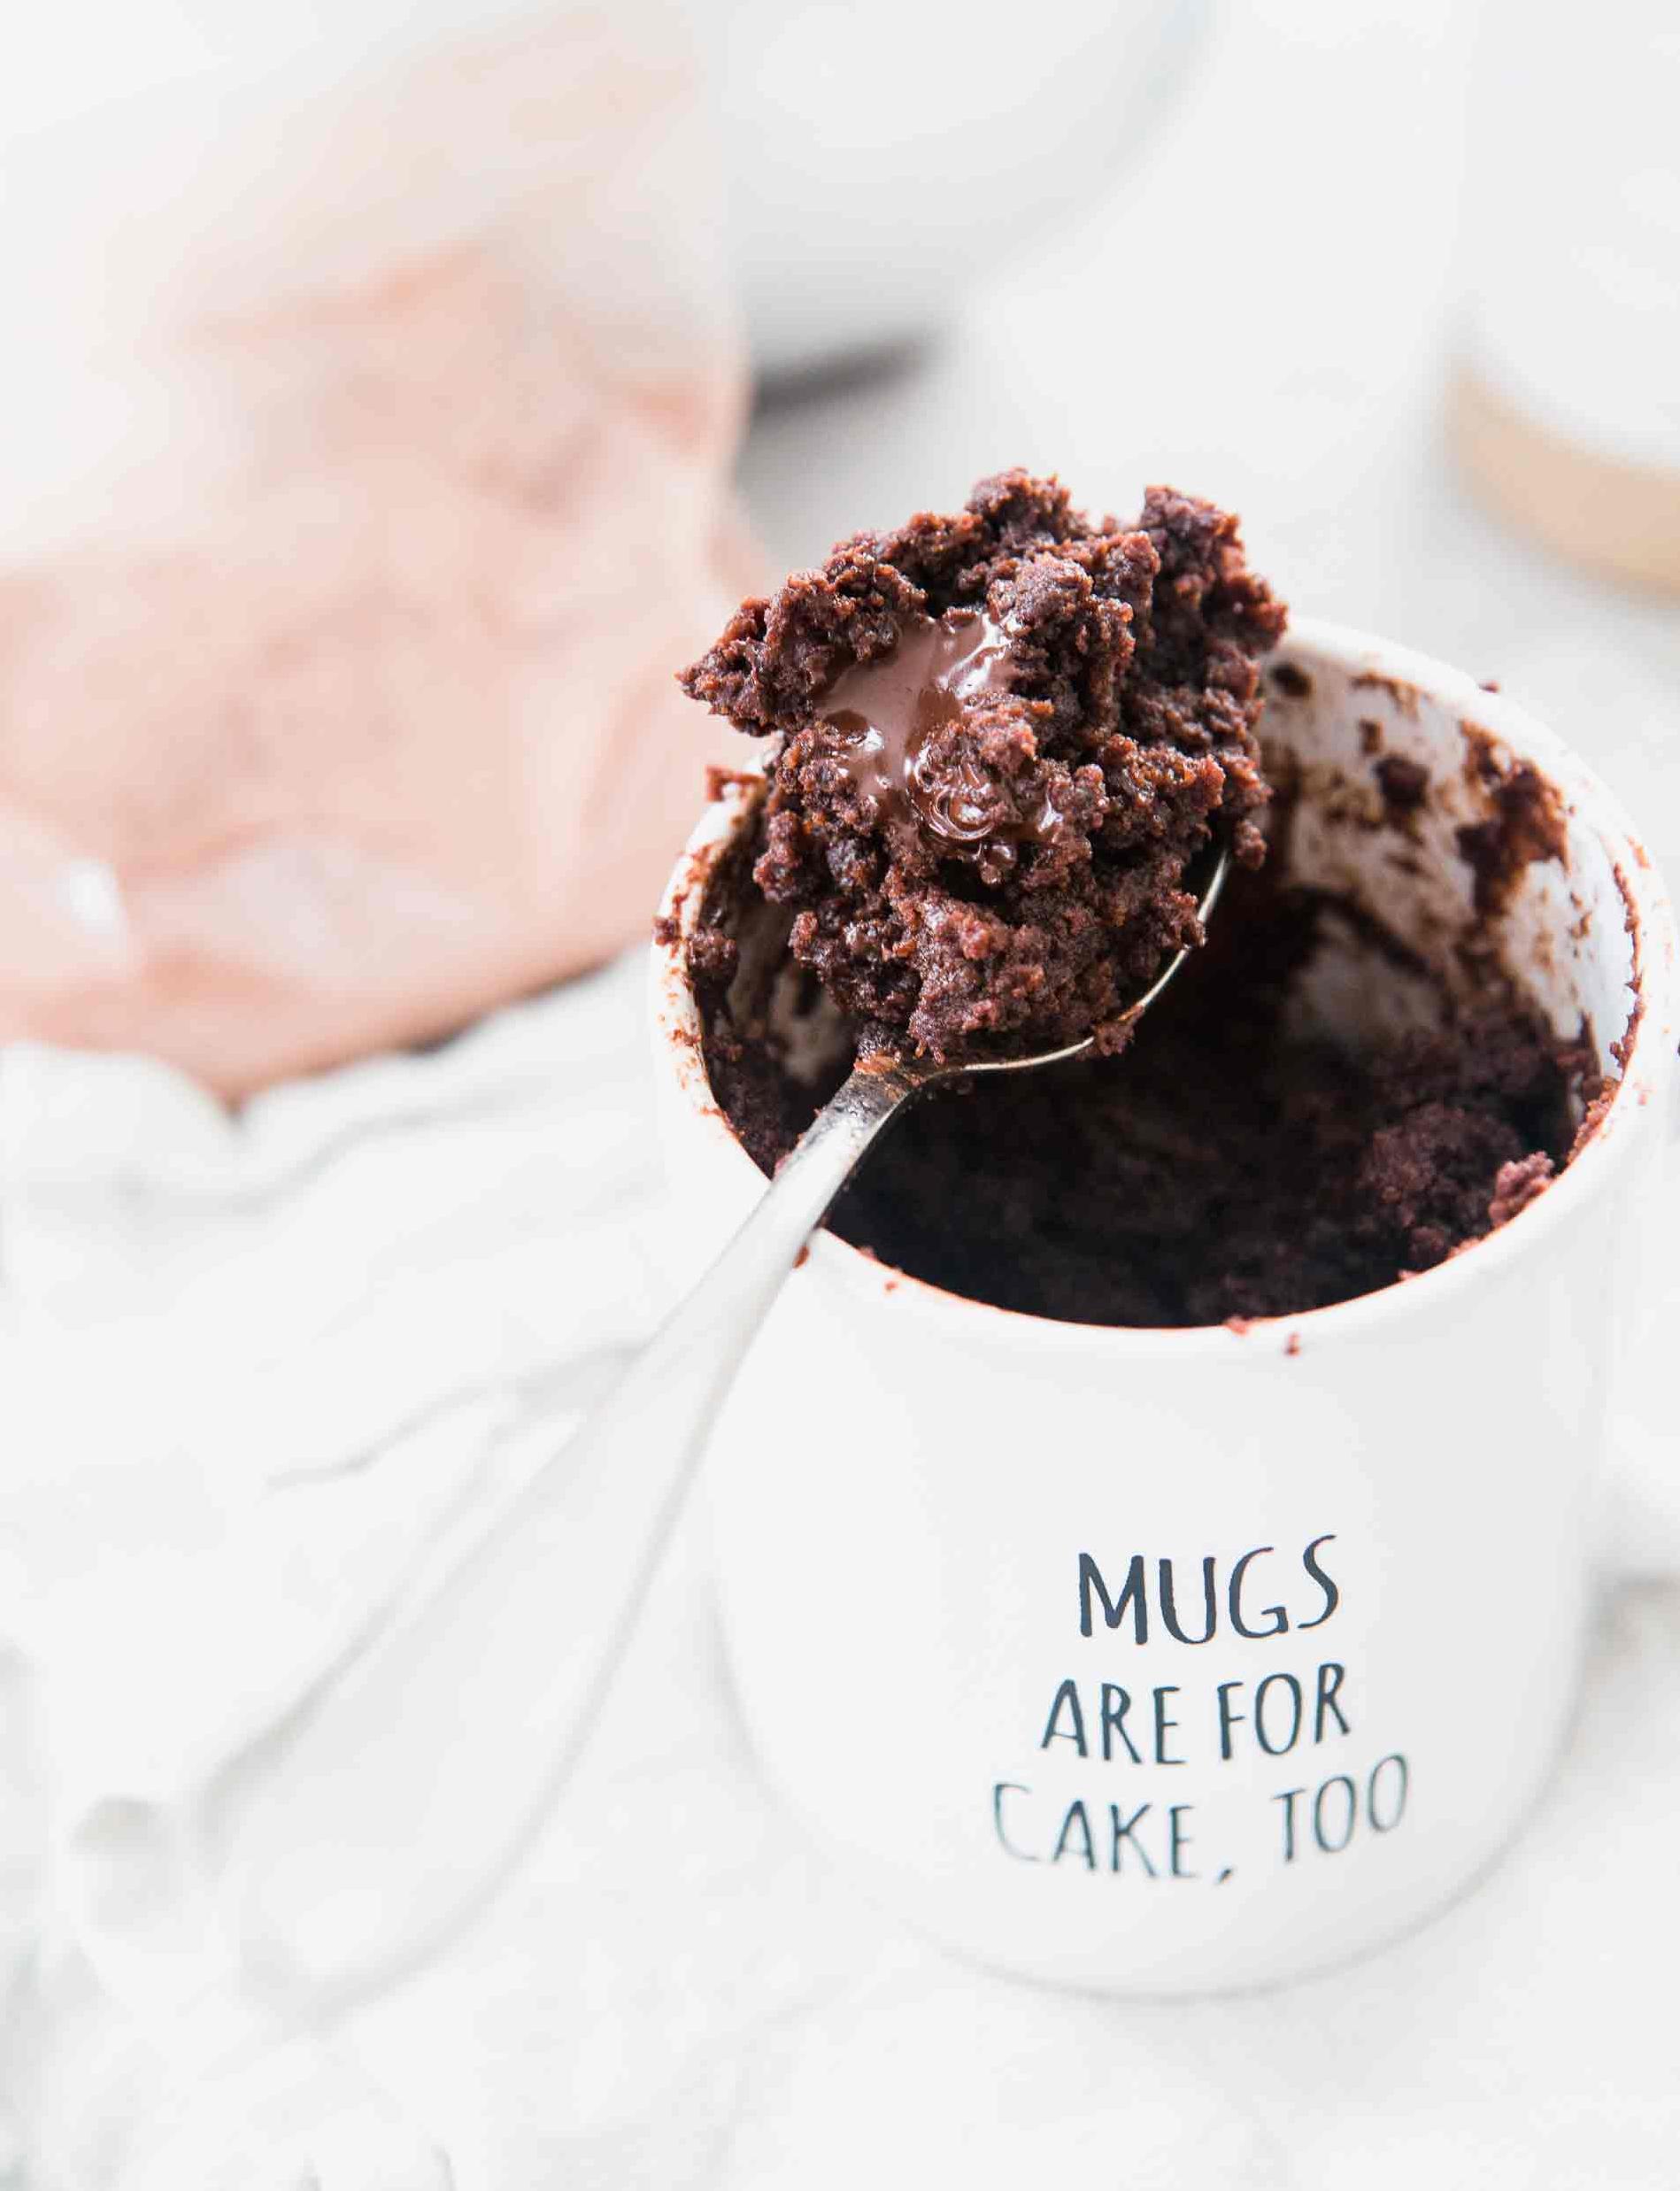  One mug, one minute, one delicious dessert